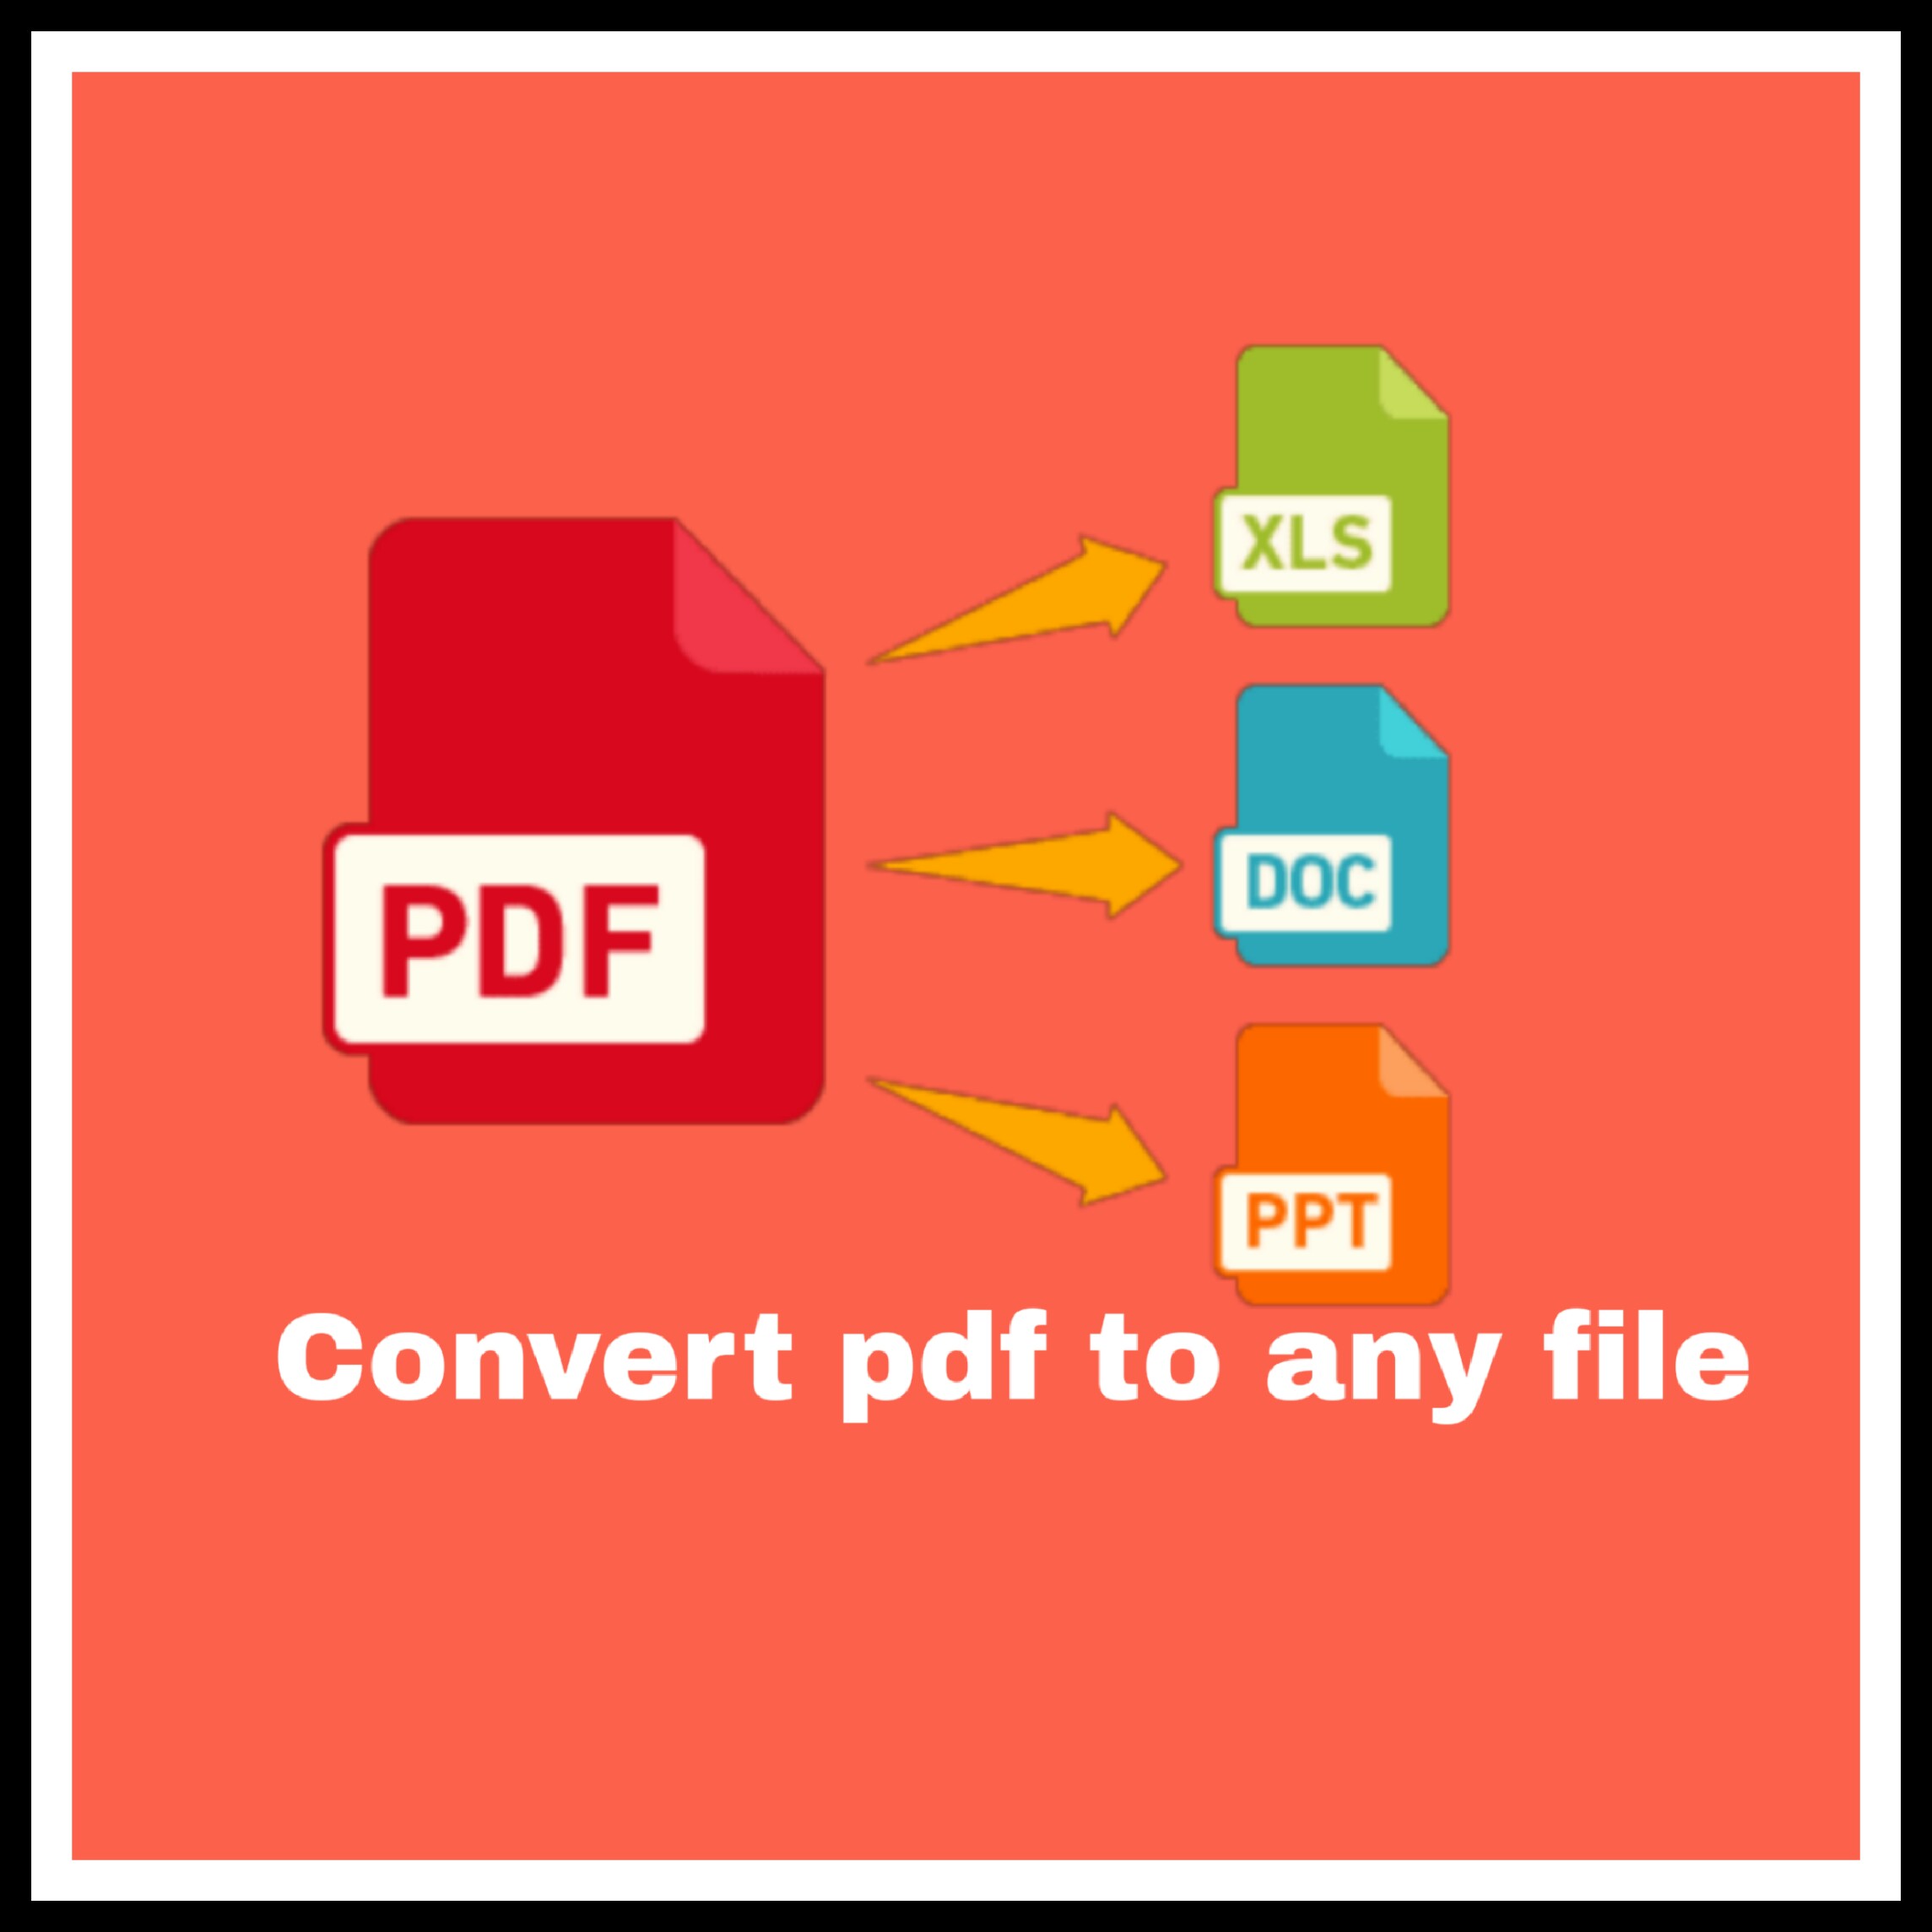 best data entry and pdf creator software